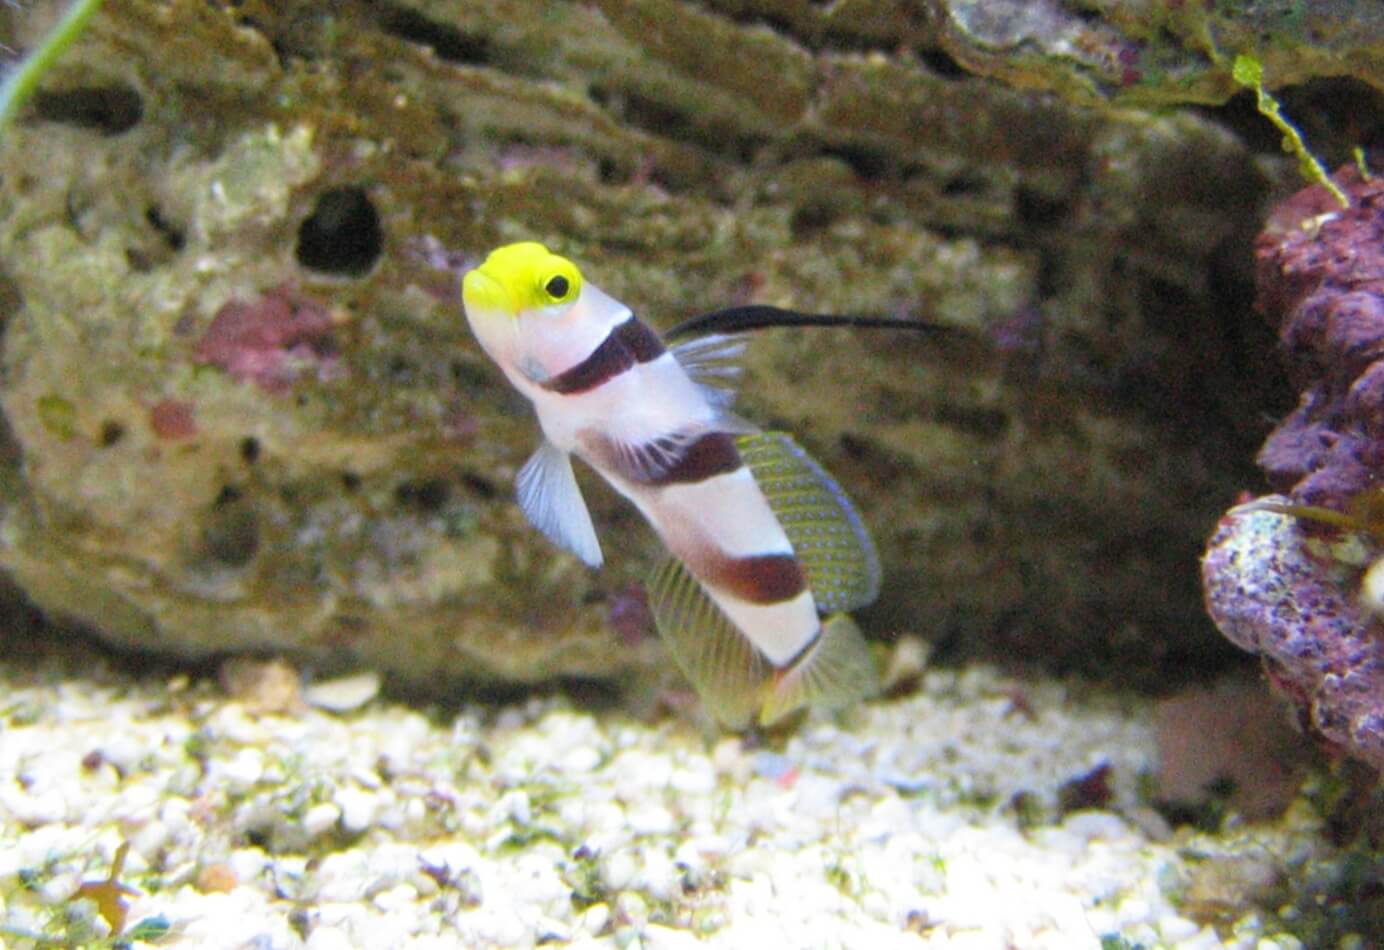 Image of a Hi-Fin Red Banded Goby